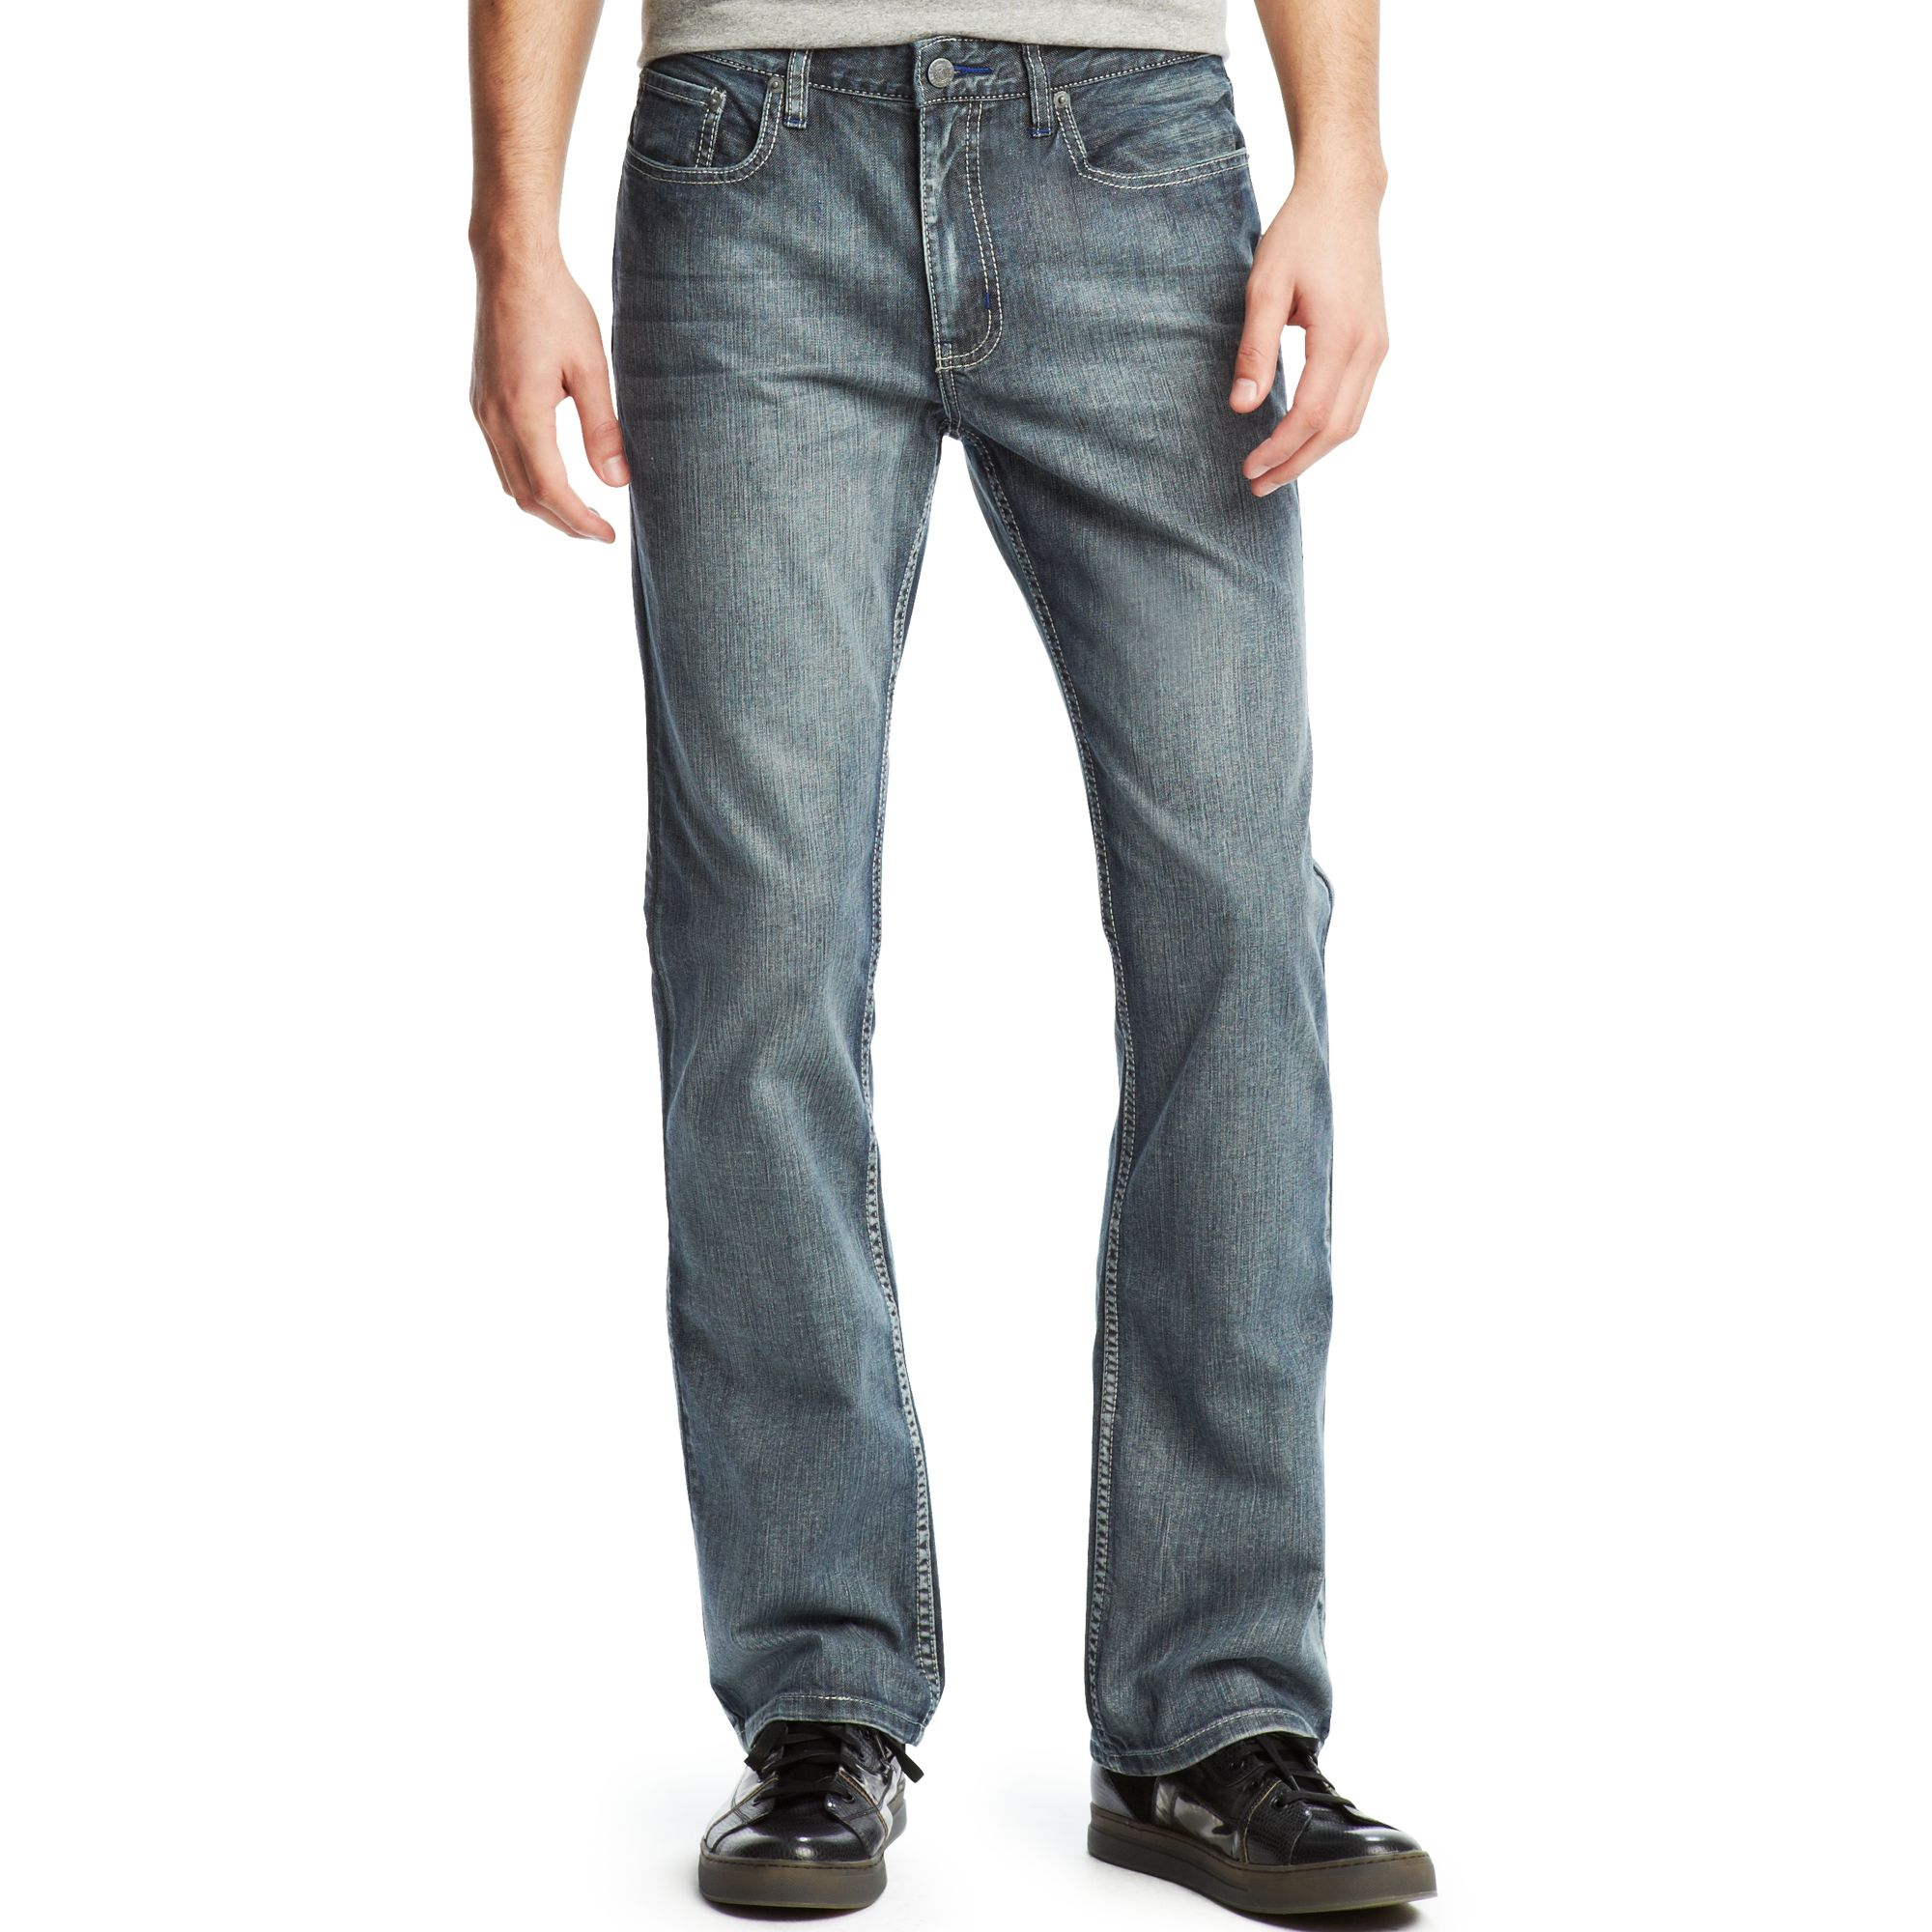 Lyst - Kenneth cole reaction Washed Boot Cut Jeans in Blue for Men